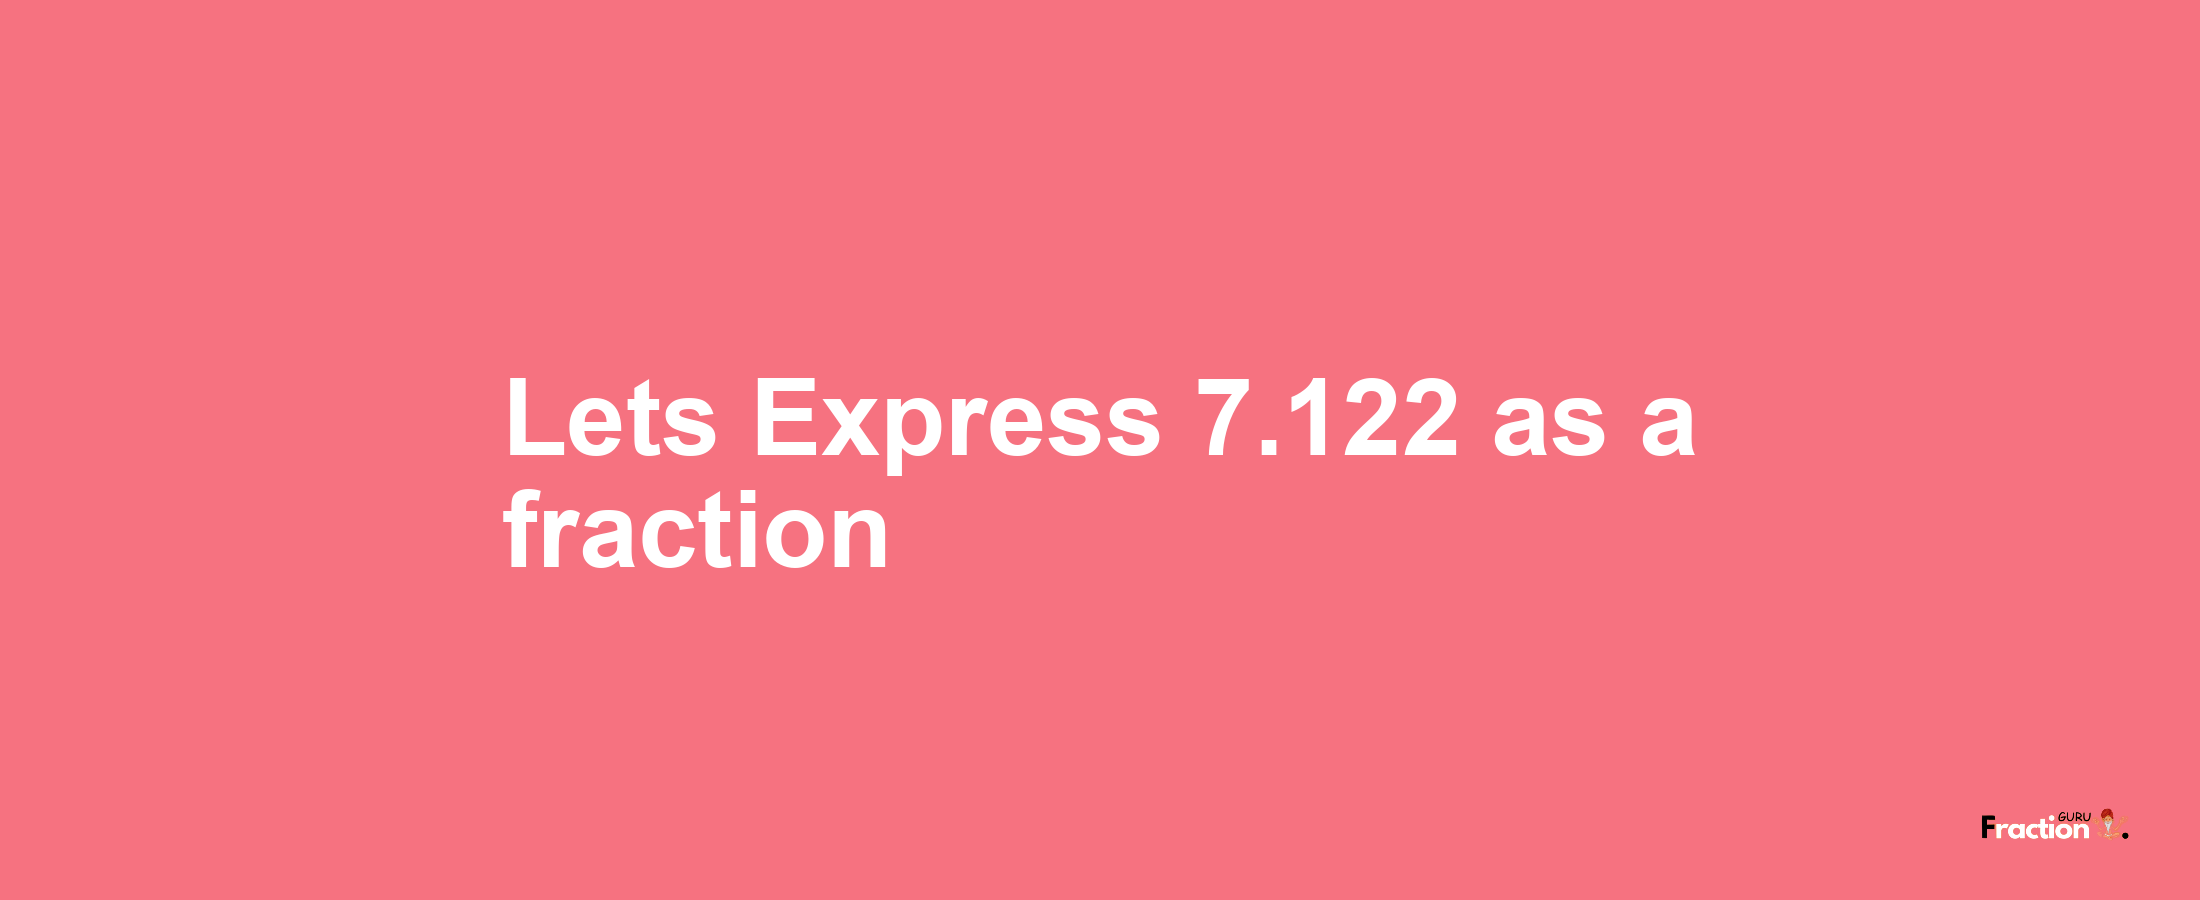 Lets Express 7.122 as afraction